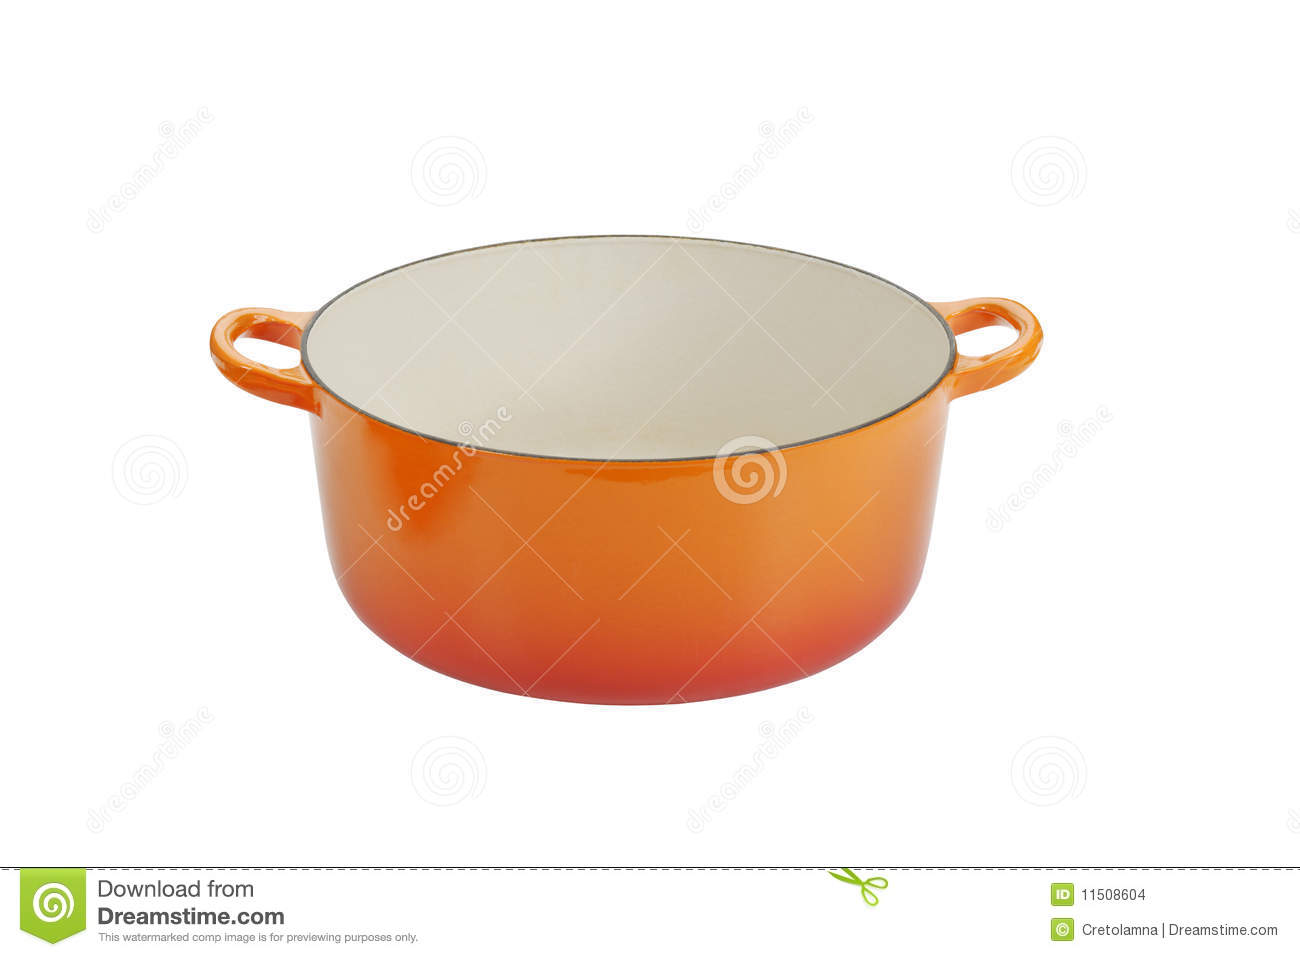 Cast Iron Cooking Pot With Clipping Path In Largest Size File